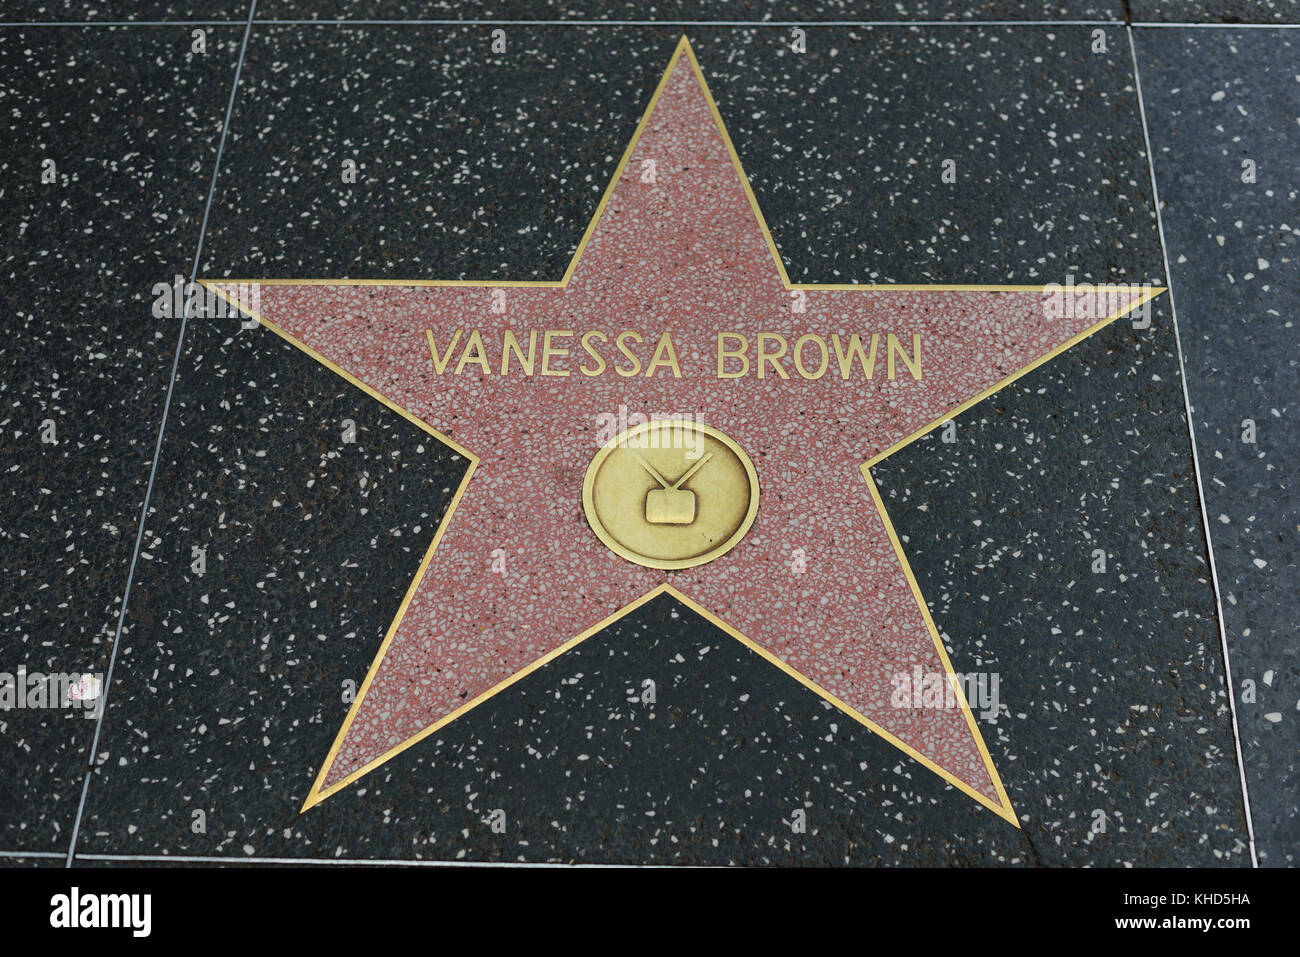 HOLLYWOOD, CA - DECEMBER 06: Vanessa Brown star on the Hollywood Walk of Fame in Hollywood, California on Dec. 6, 2016. Stock Photo